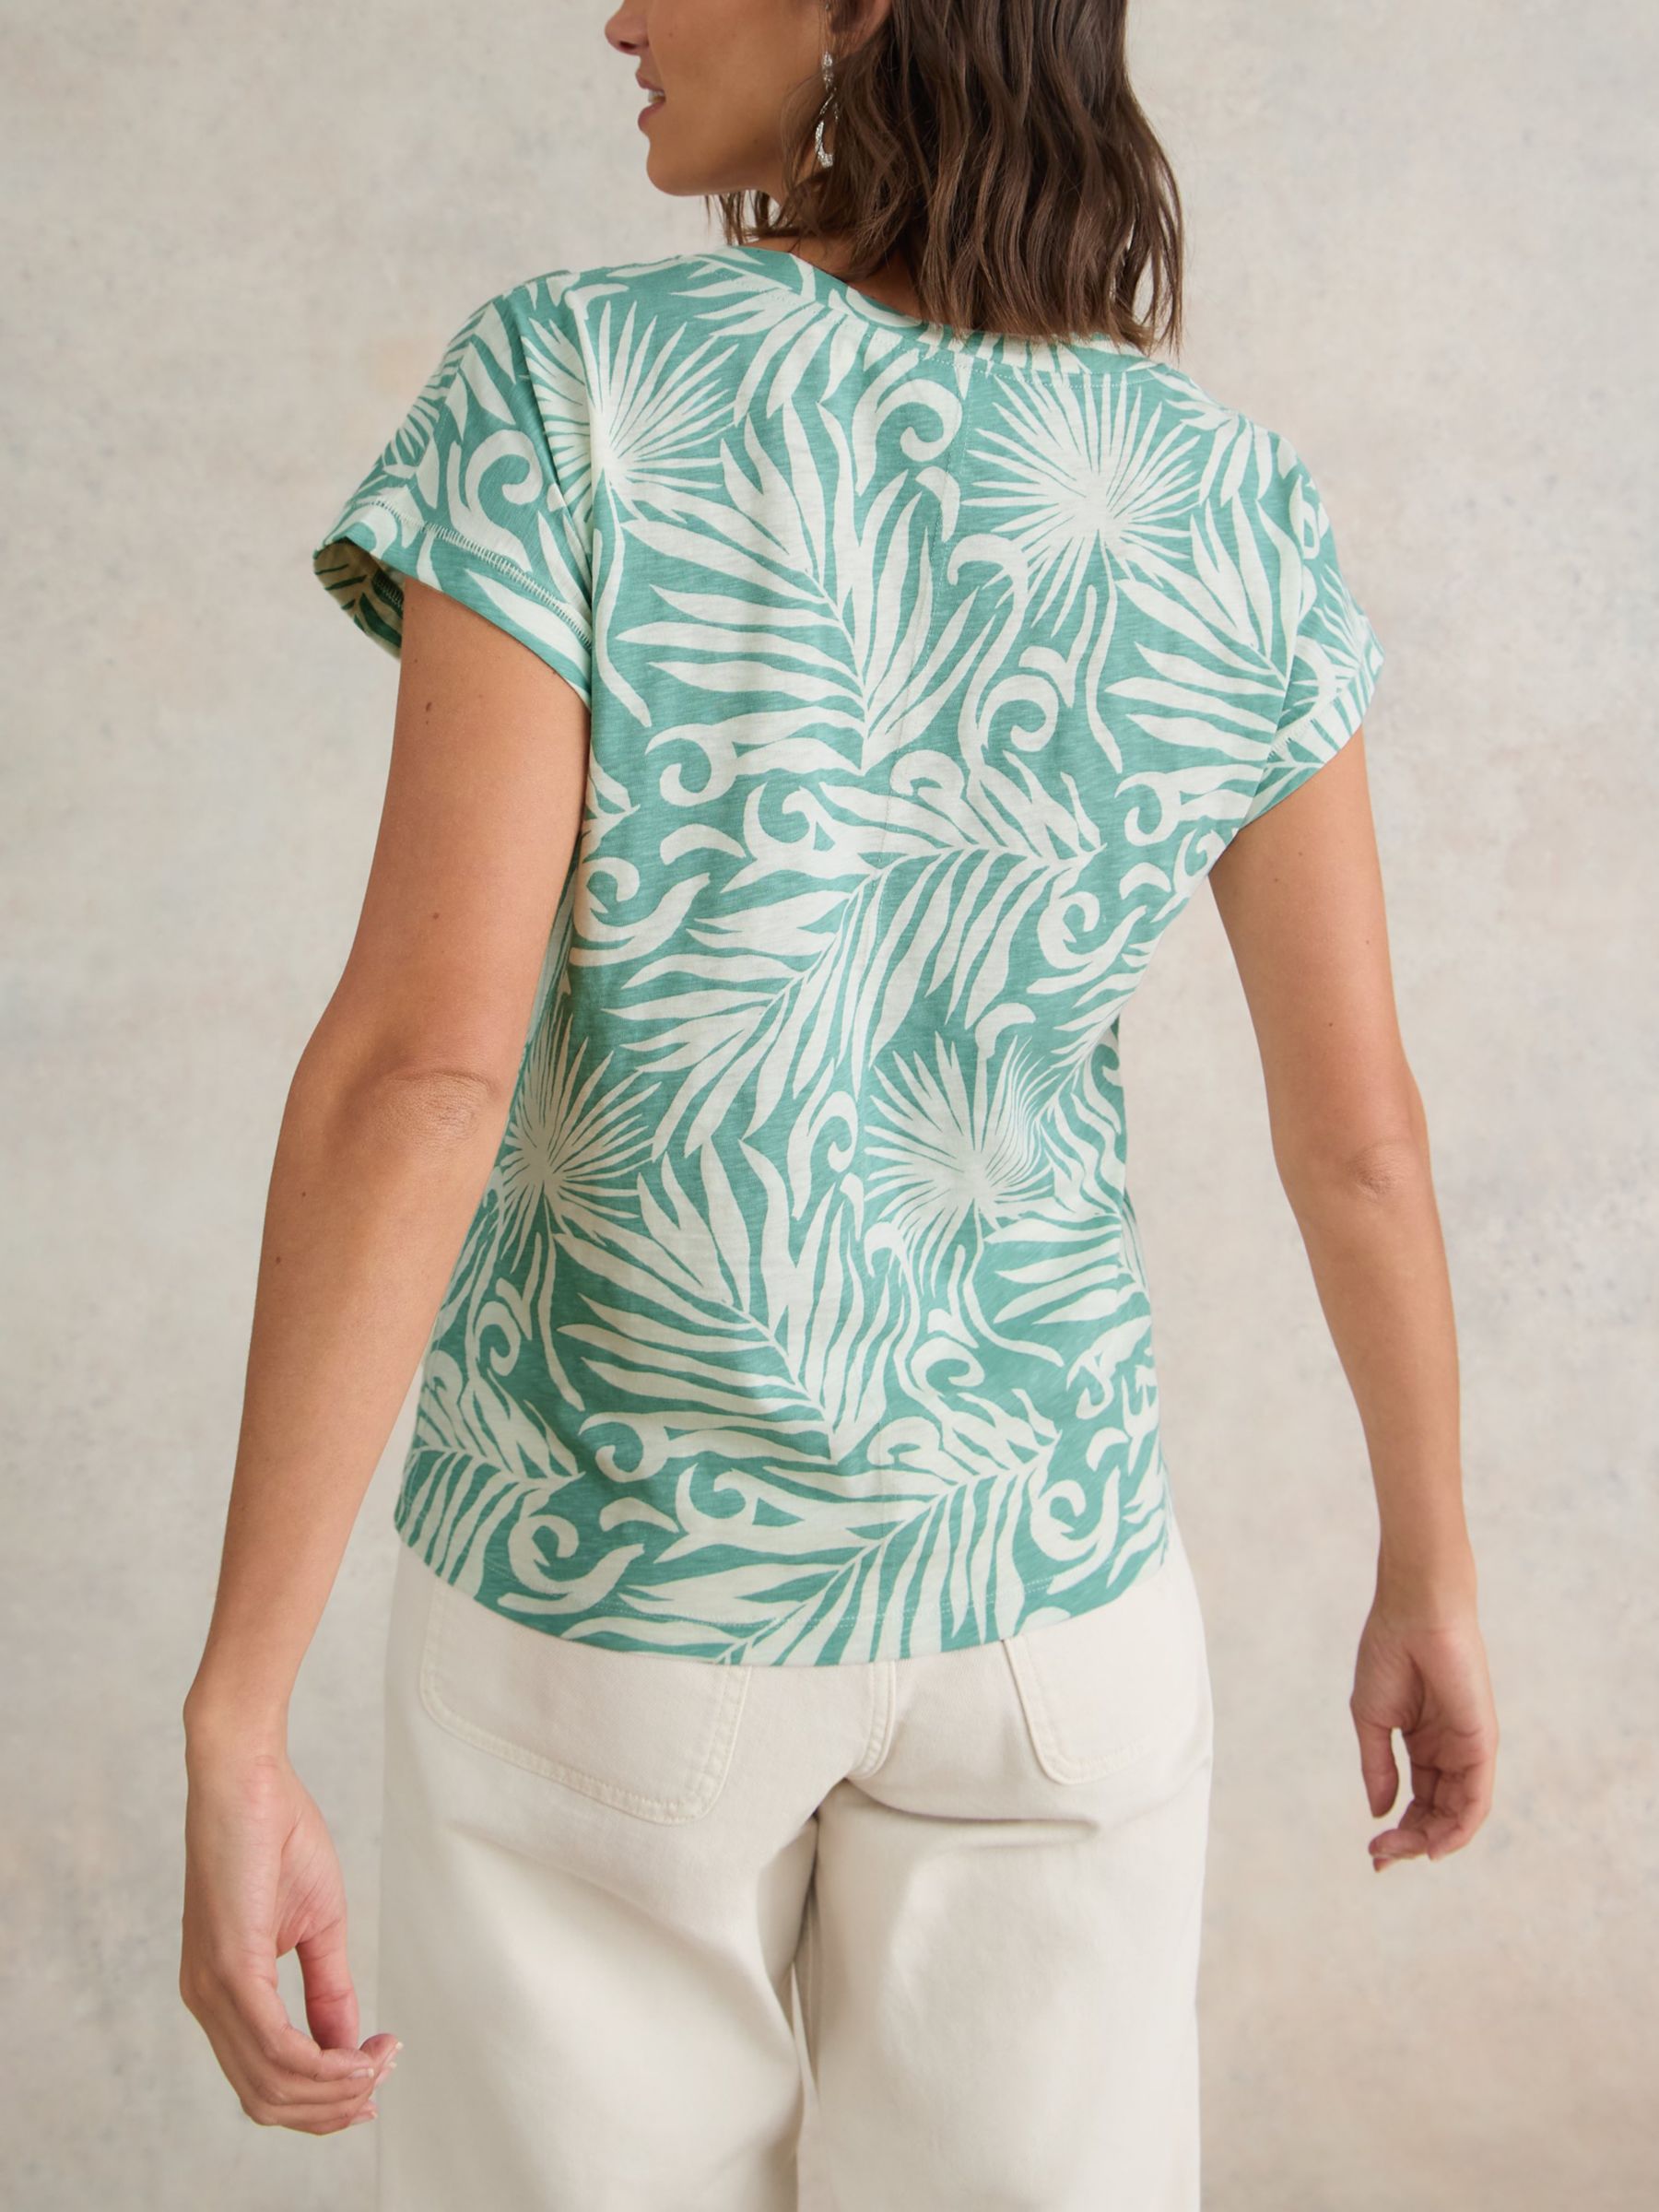 Buy White Stuff Nelly Notch Neck T-Shirt, Teal Online at johnlewis.com